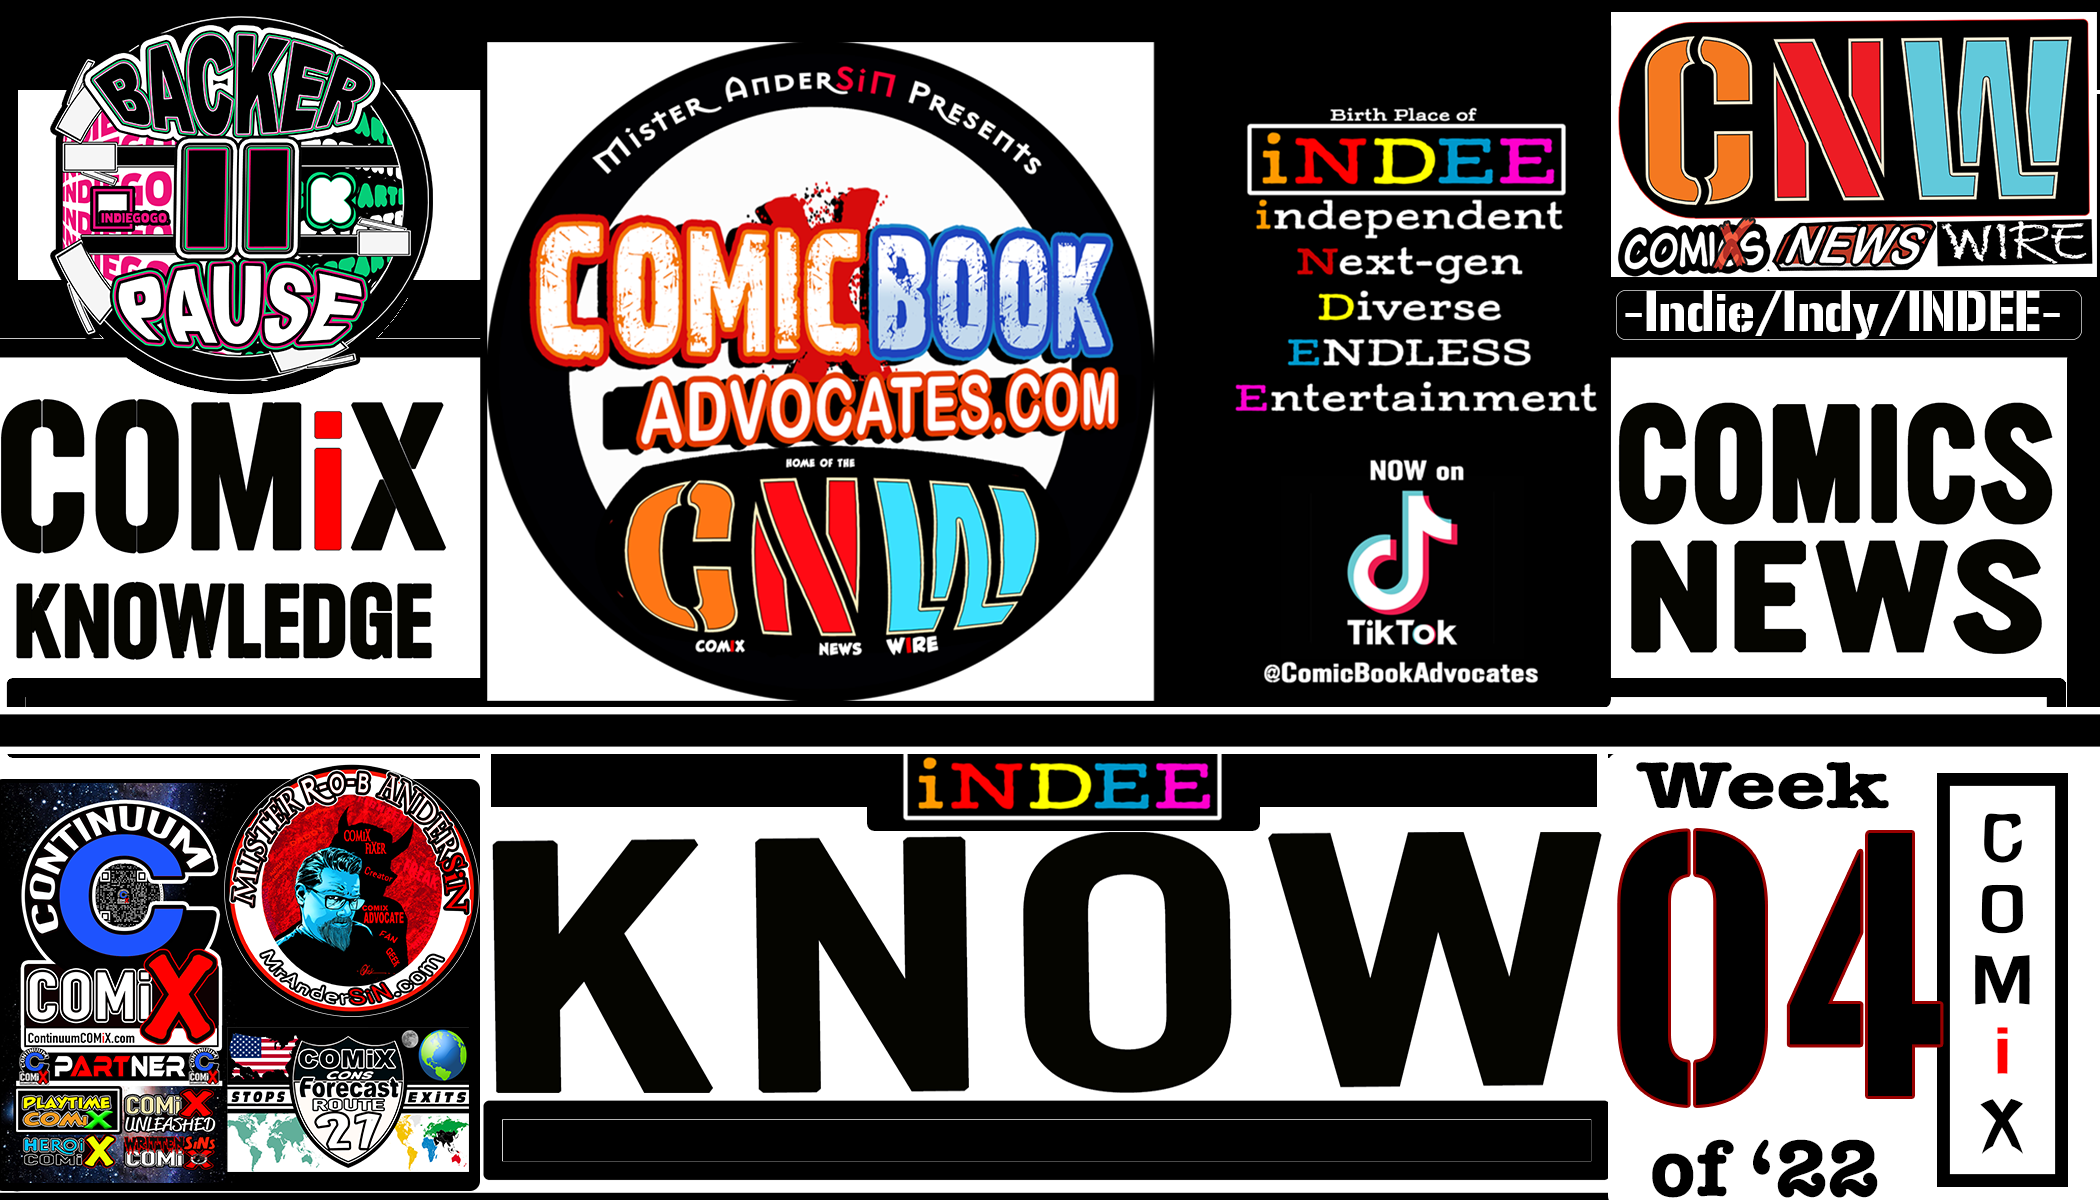 The INDEE NEWS WiRE-Week 4  of 2022 – – THE COMiX NEWS WiRE.